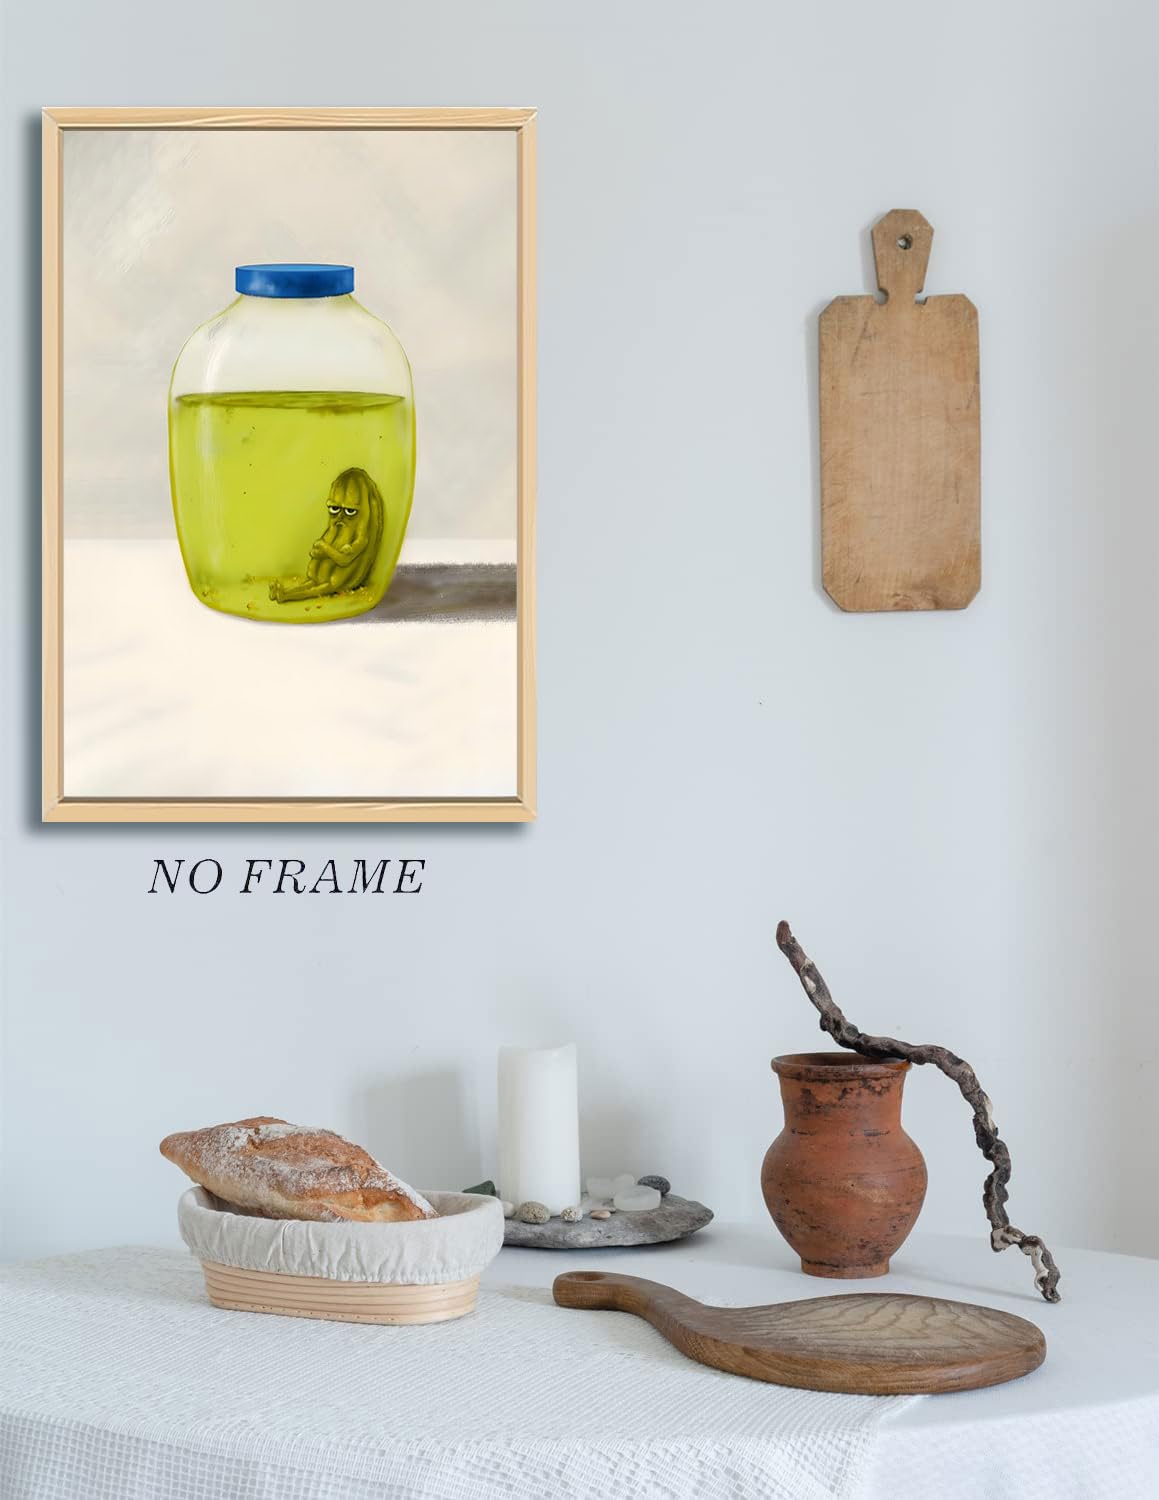 Hwetui Funny Kitchen Pickle Poster Modern Vintage Cute Wall Art Last Lonely in Bottle canvas Print Eclectic Home Decor Painting Olive Green Cool Gifts Picture for restaurant apartment12 x16 Unframed